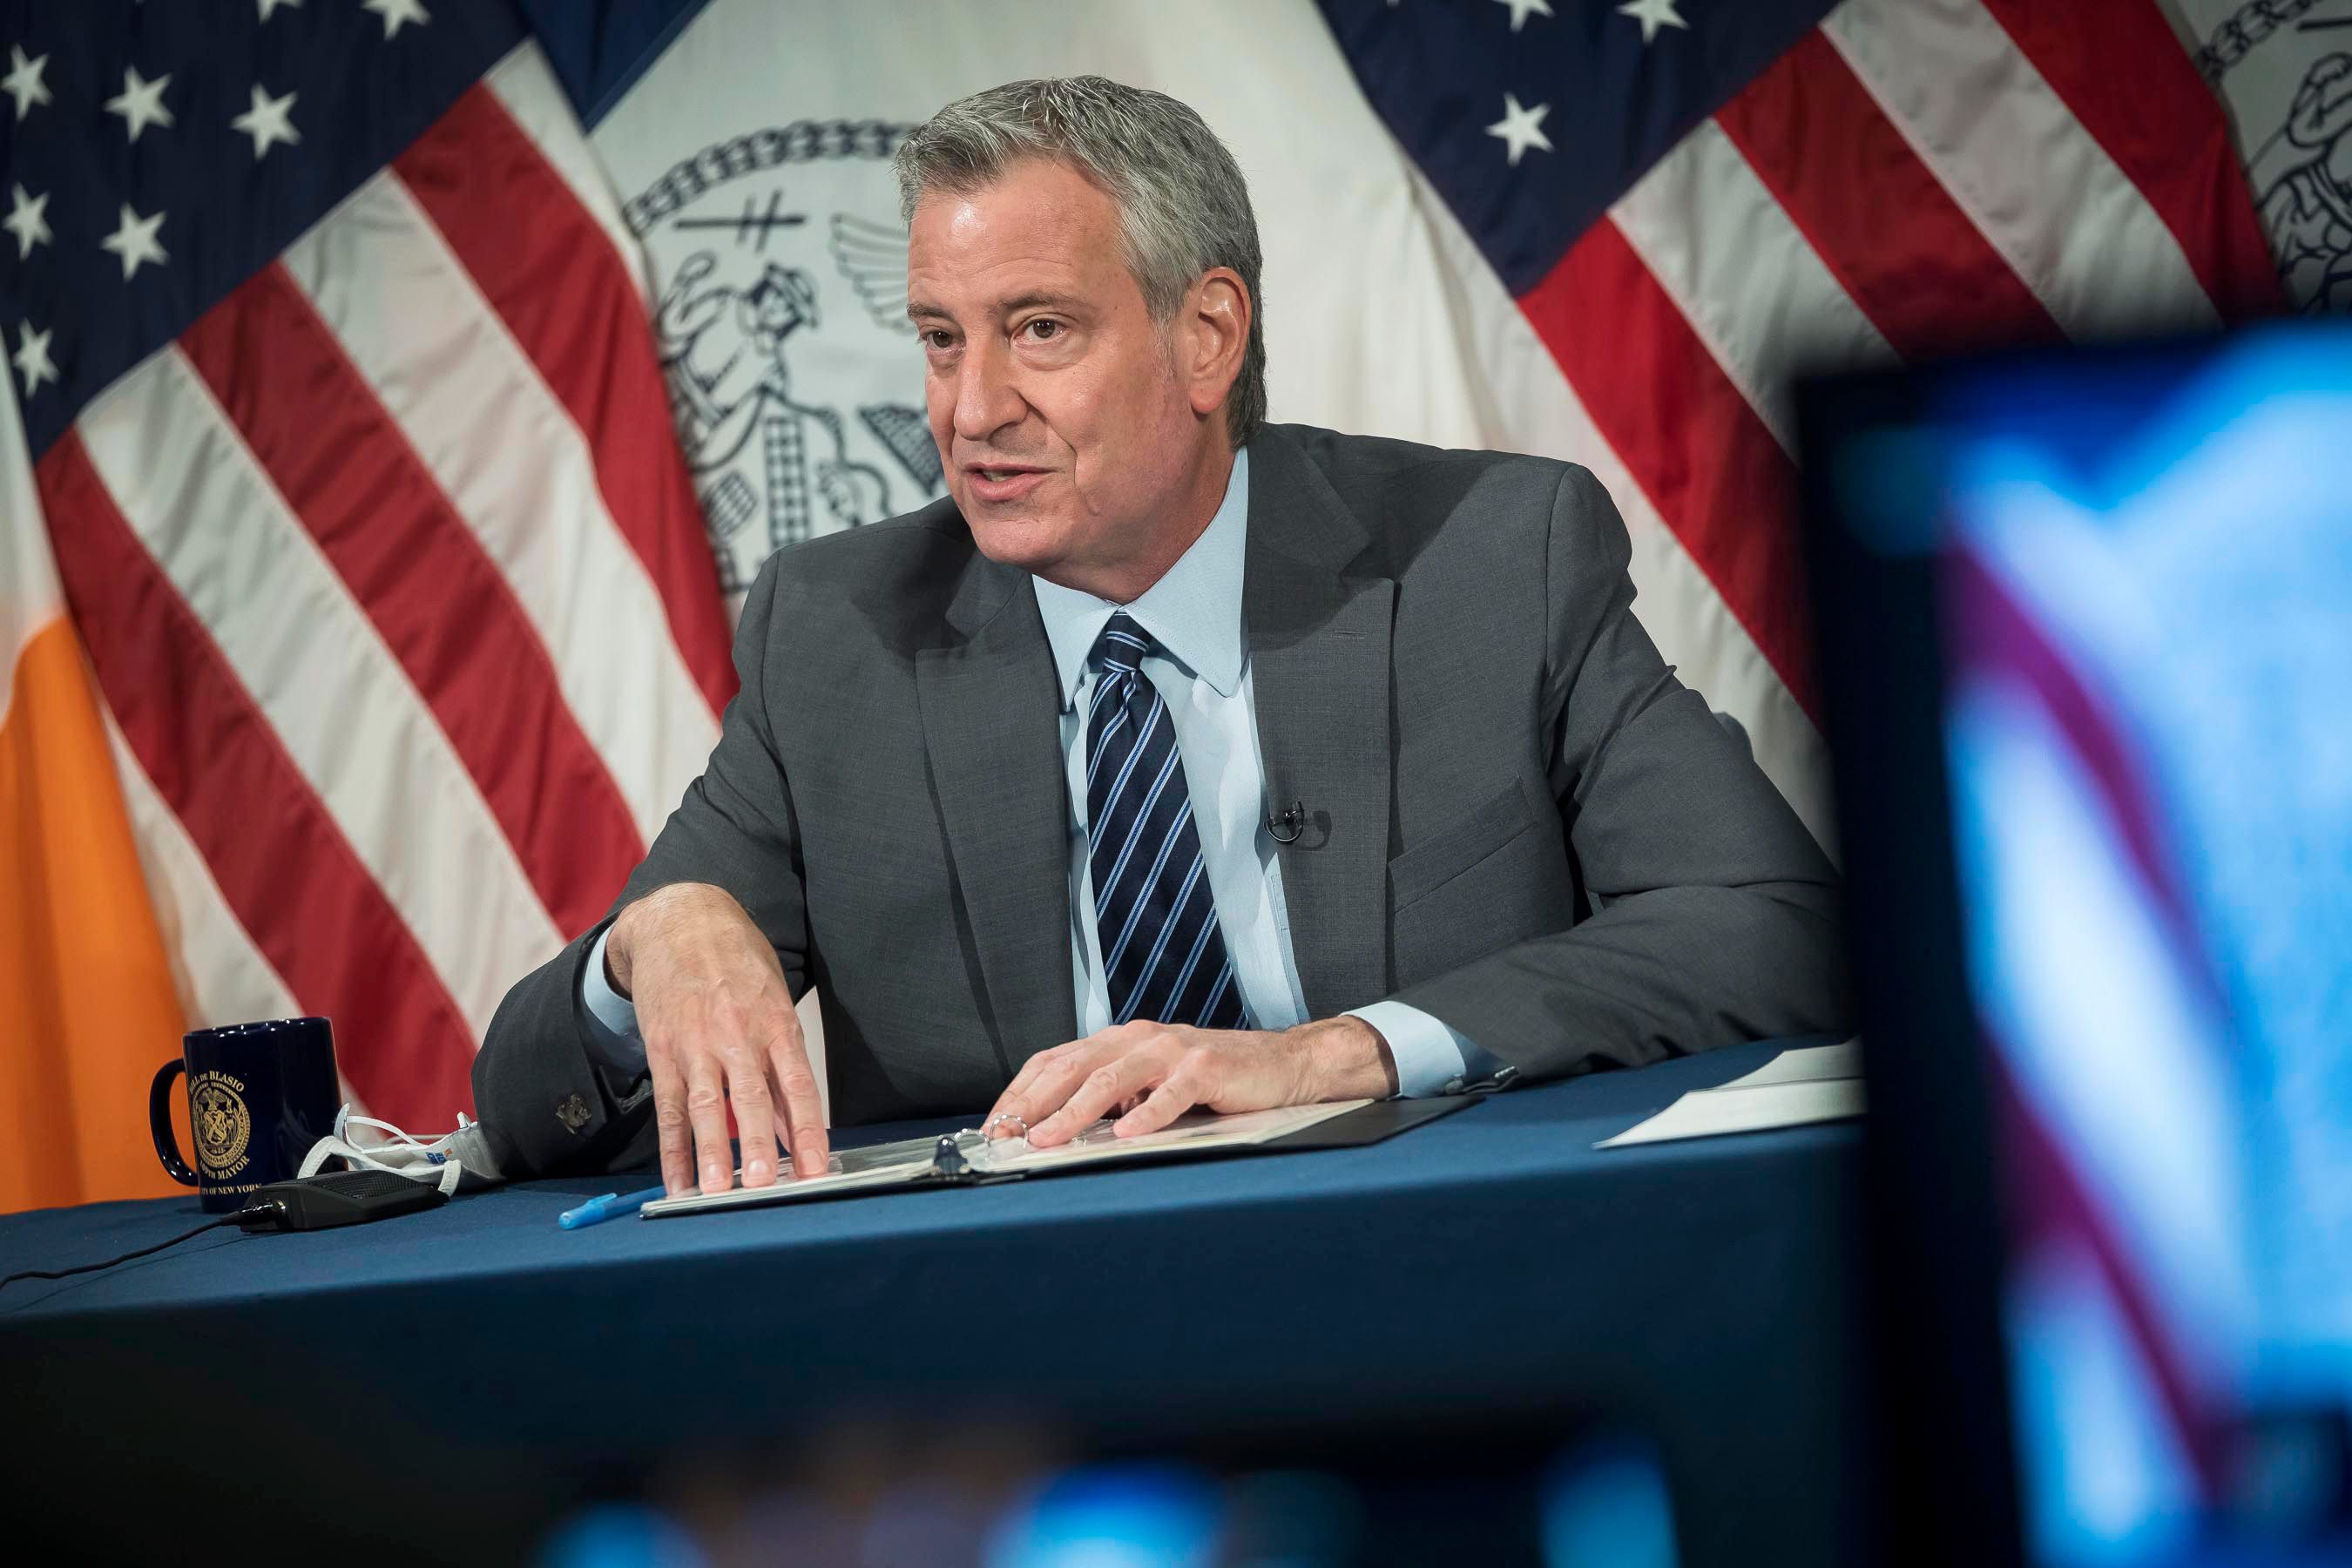 Mayor Bill de Blasio talks while sitting at a desk with U.S. and NYC flags behind him.